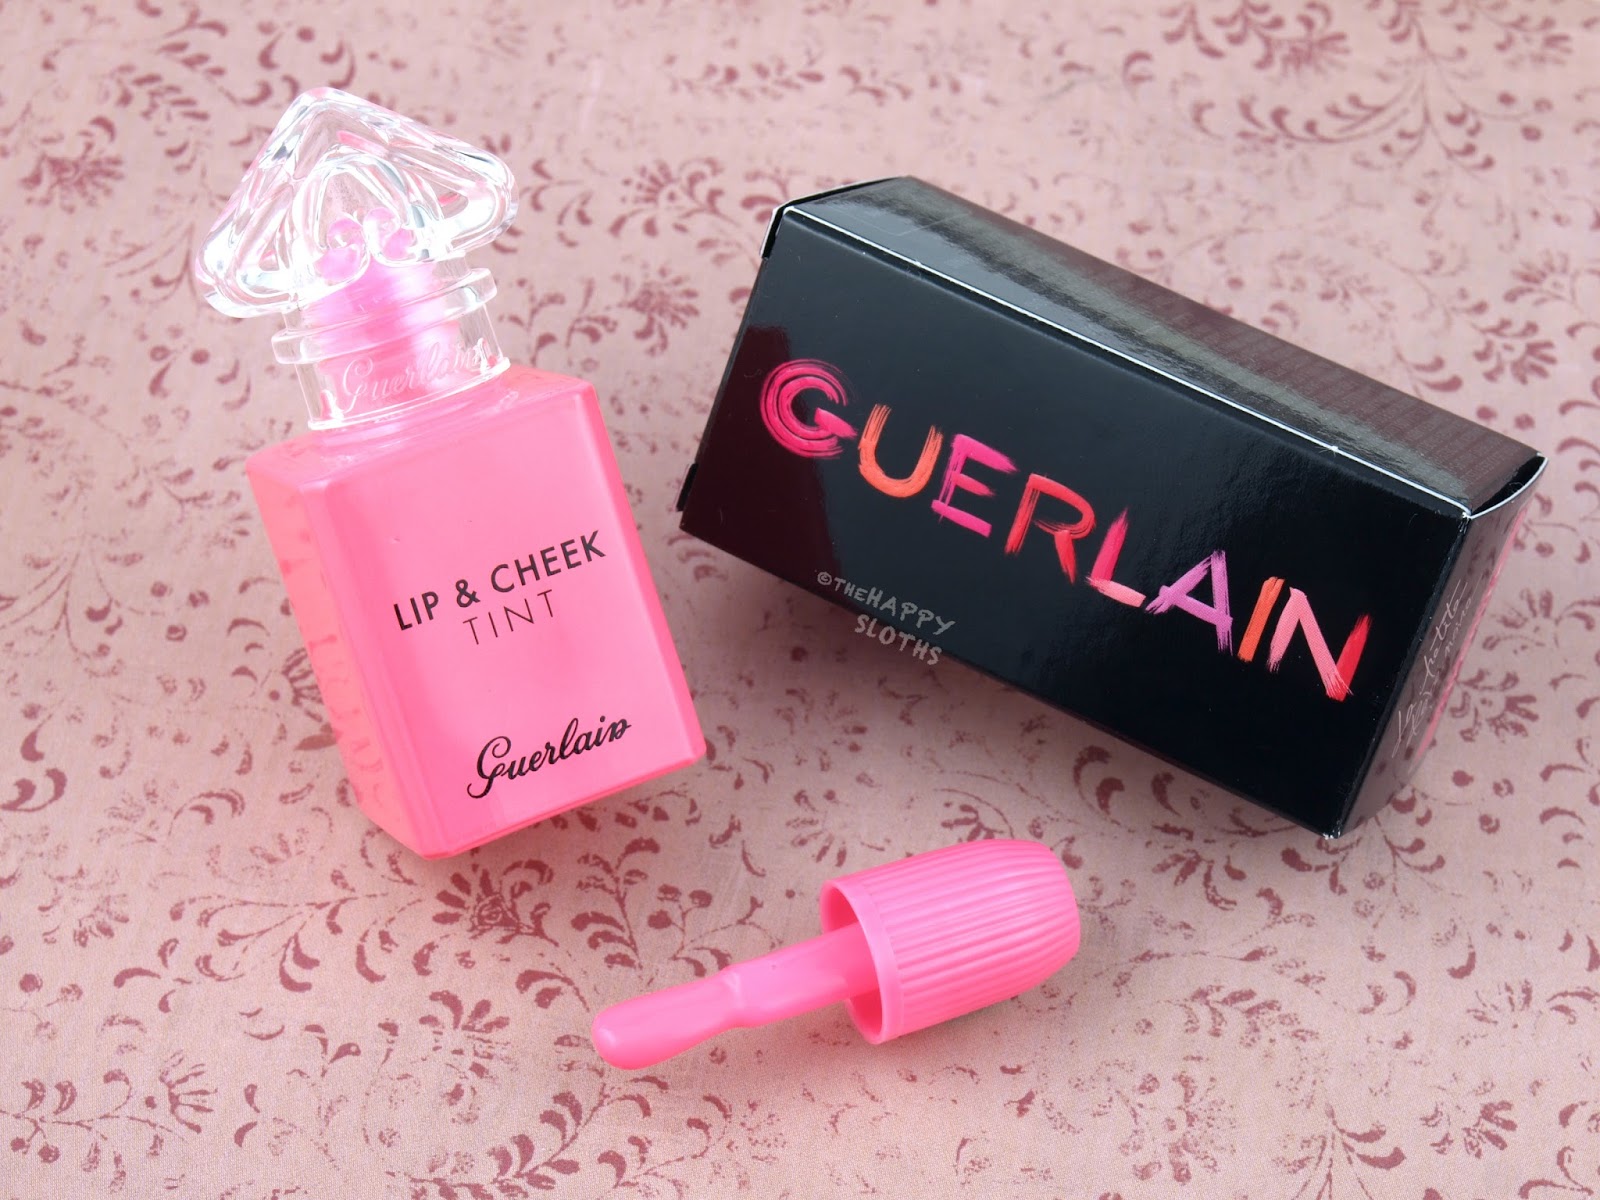 Guerlain La Petite Robe Noire Lip & Cheek Tinted Gel Review and Swatches